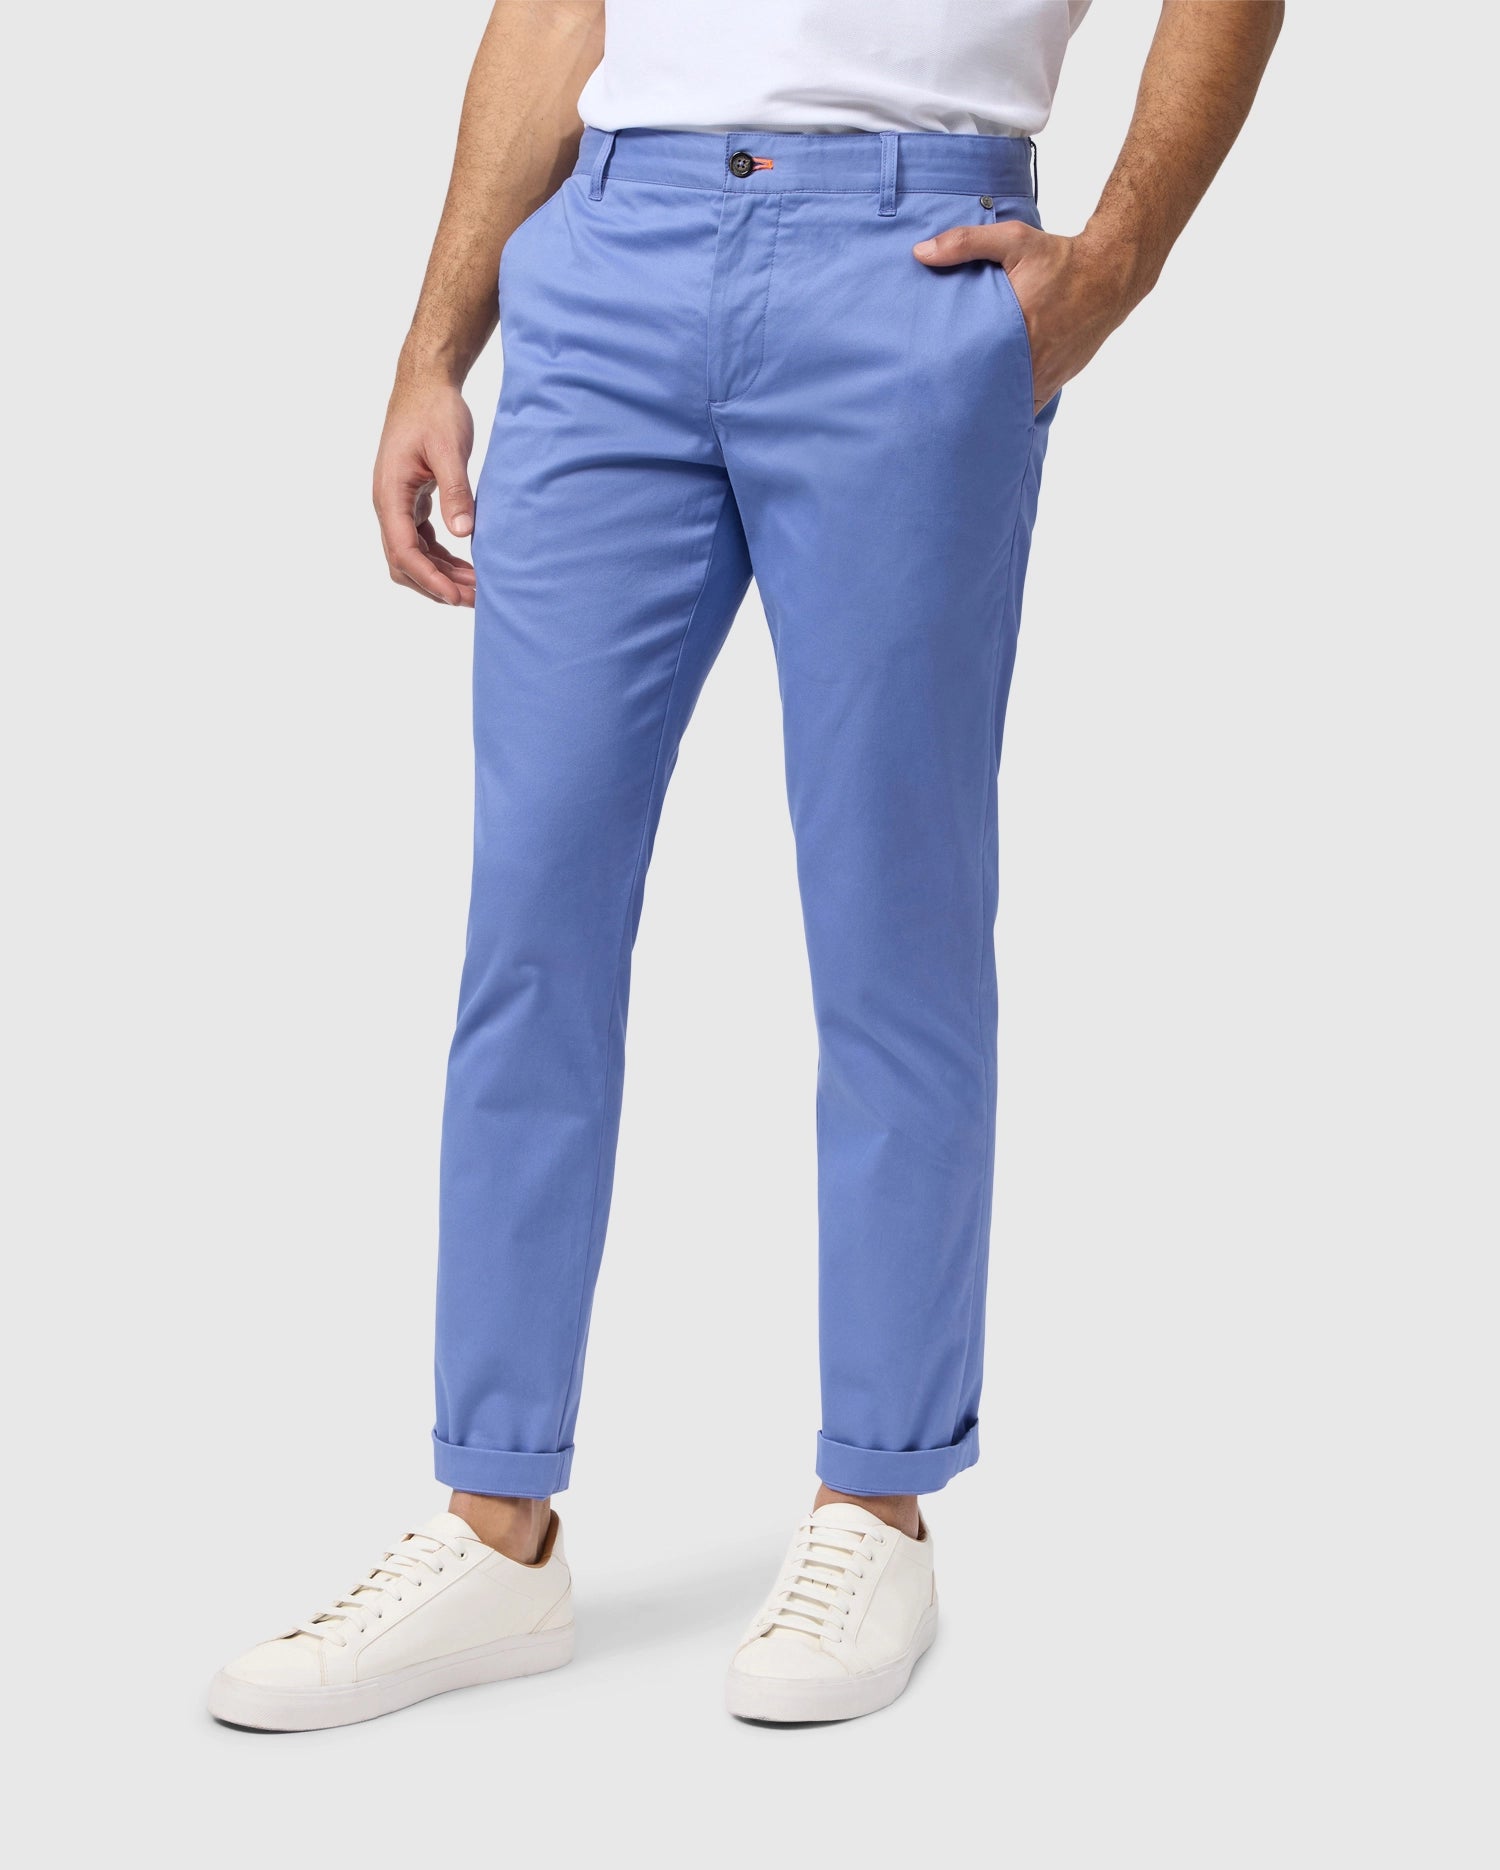 Men's Lacoste Chino Slim Fit New Classic Blue (HDE) Pants on